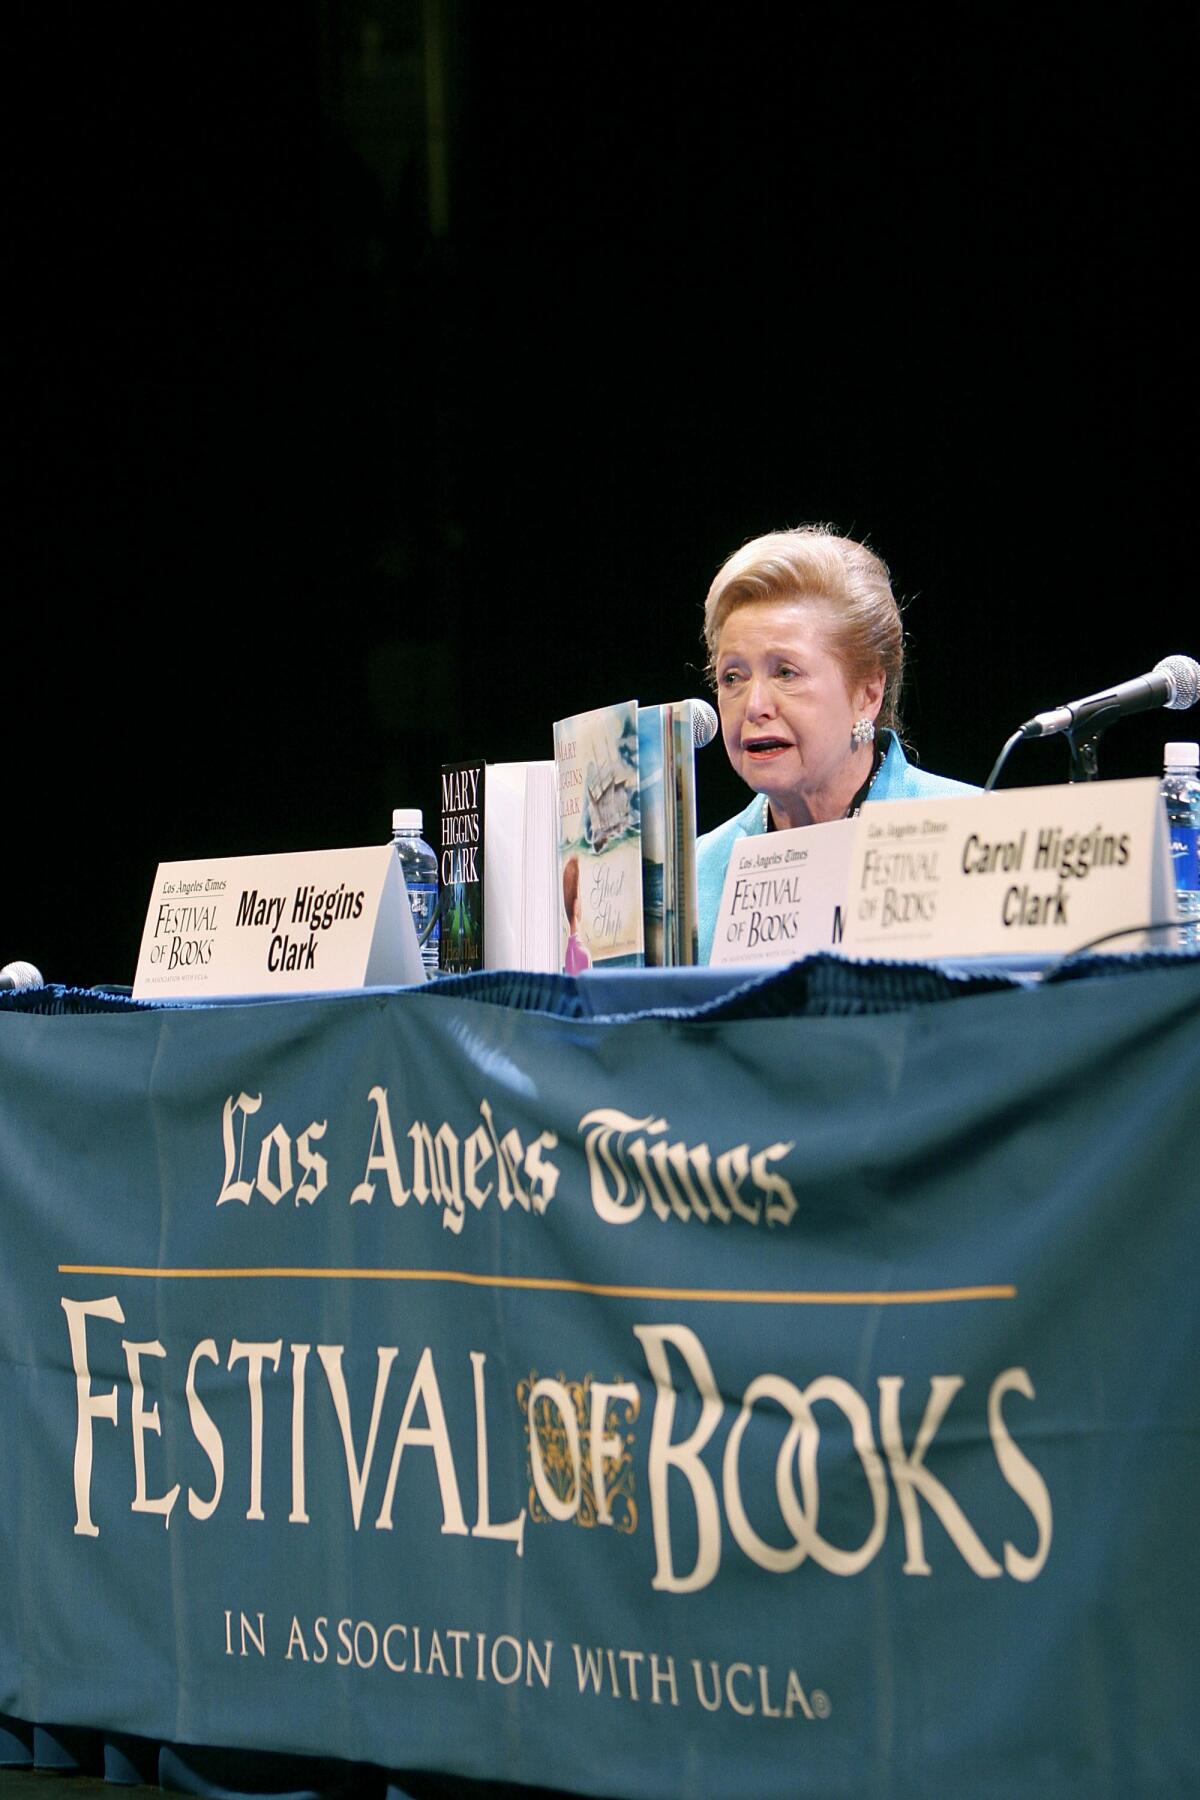 Mary Higgins Clark at a table draped with a "Los Angeles Times Festival of Books" banner.